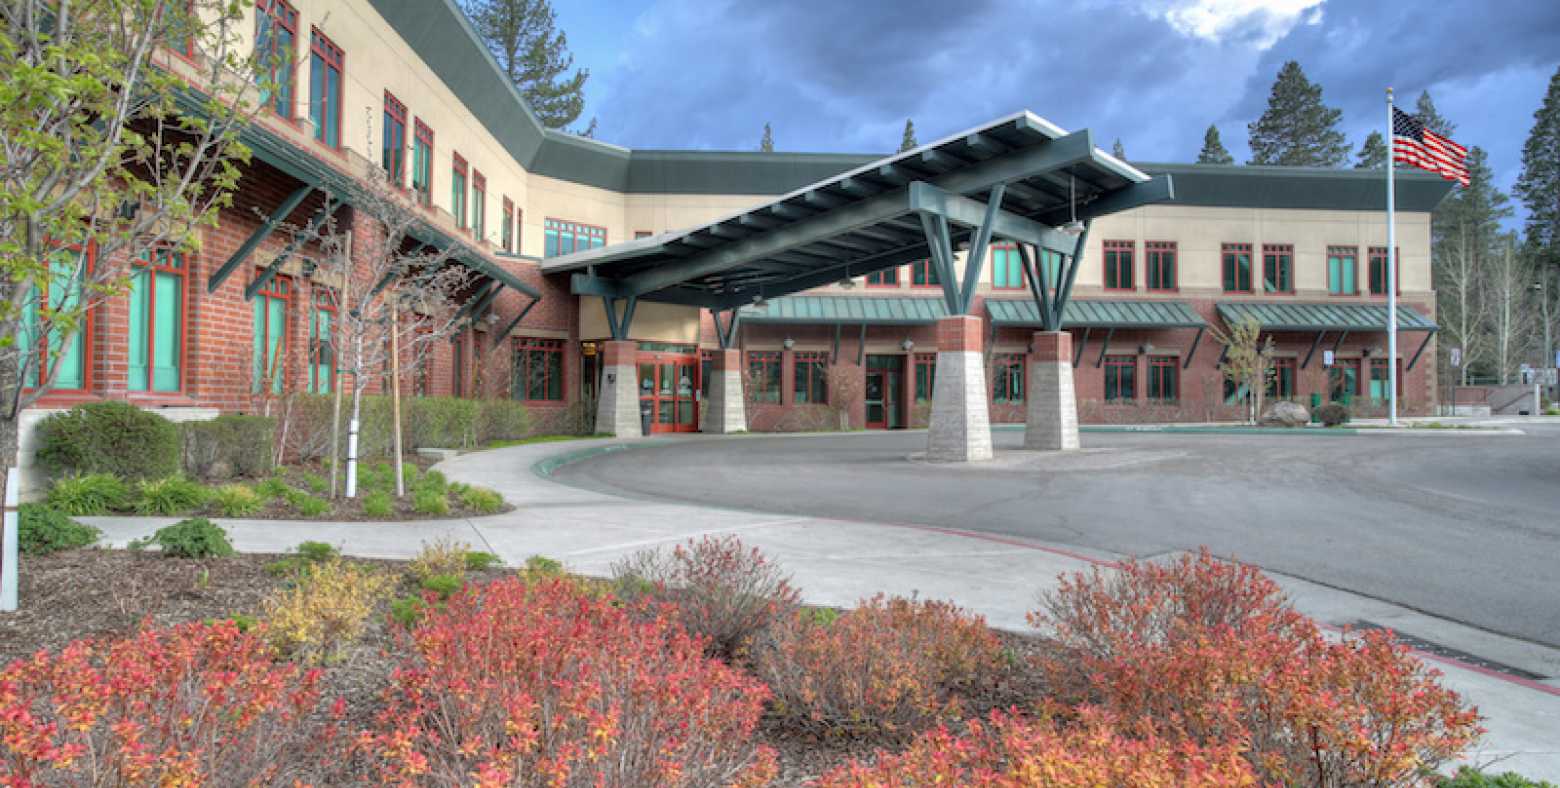 Tahoe Forest Hospital exterior